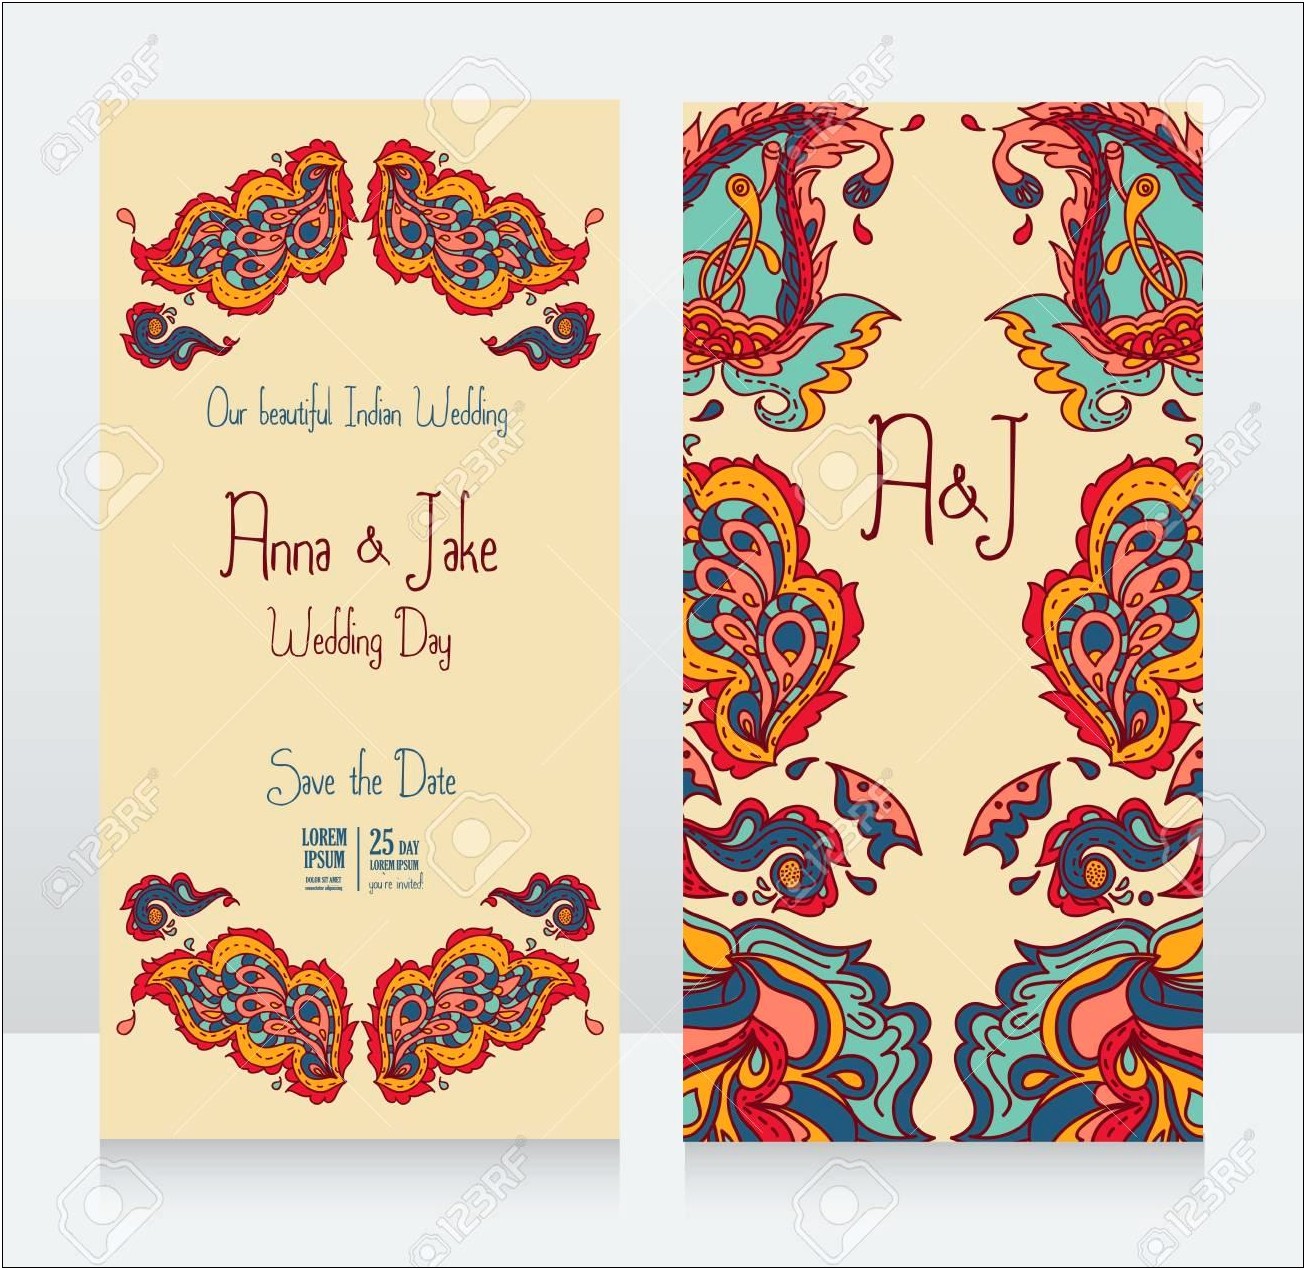 Save The Date Template Indian Wedding Free